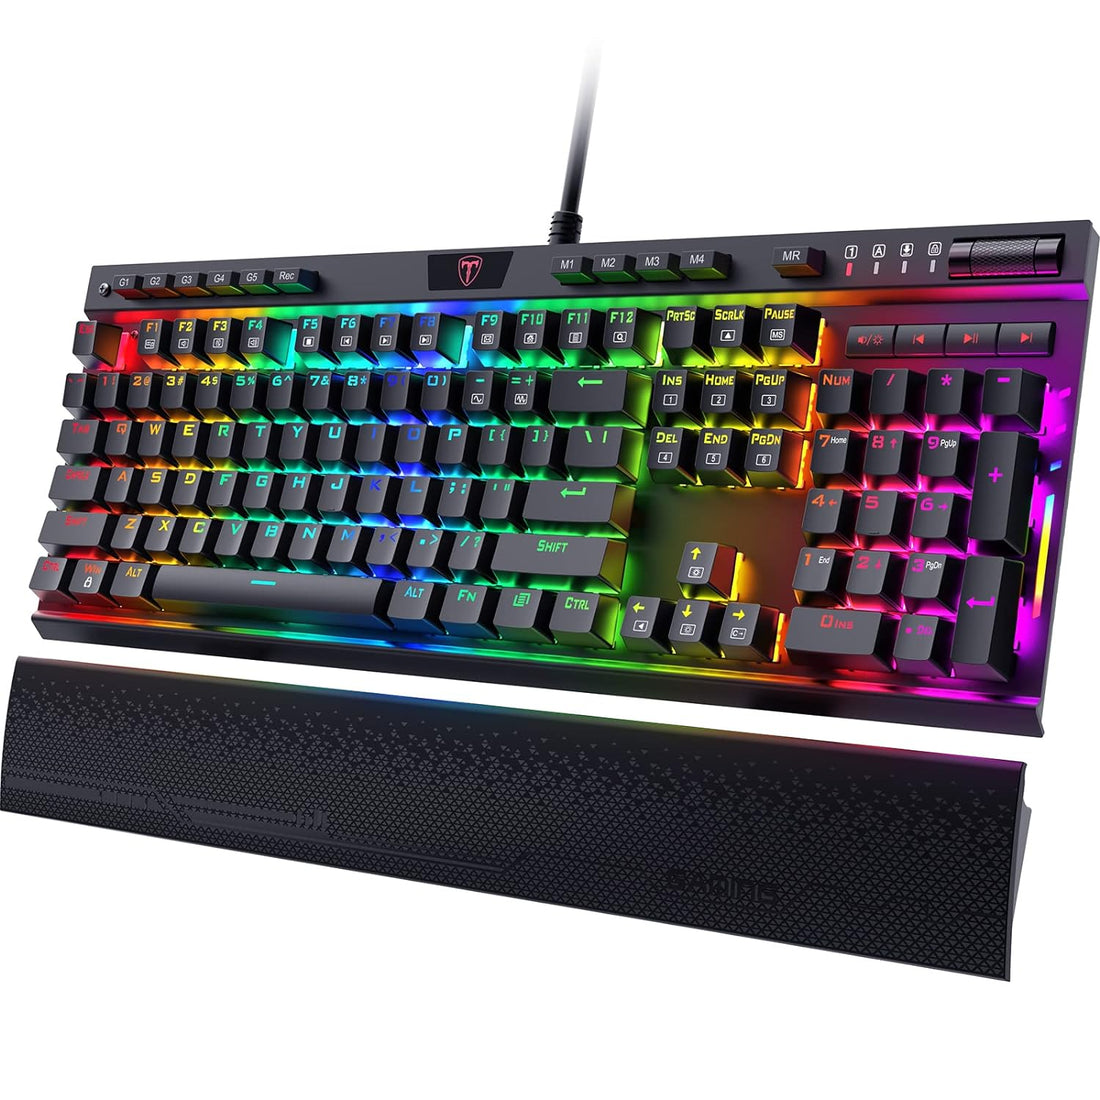 RisoPhy Wired Mechanical Gaming Keyboard - Hot-Swappable Red Switches - Linear & Silent - Chroma RGB Lighting - Programmable Macros - Aluminum Alloy Frame - Magnetic Wrist Rest - Media Control Knob